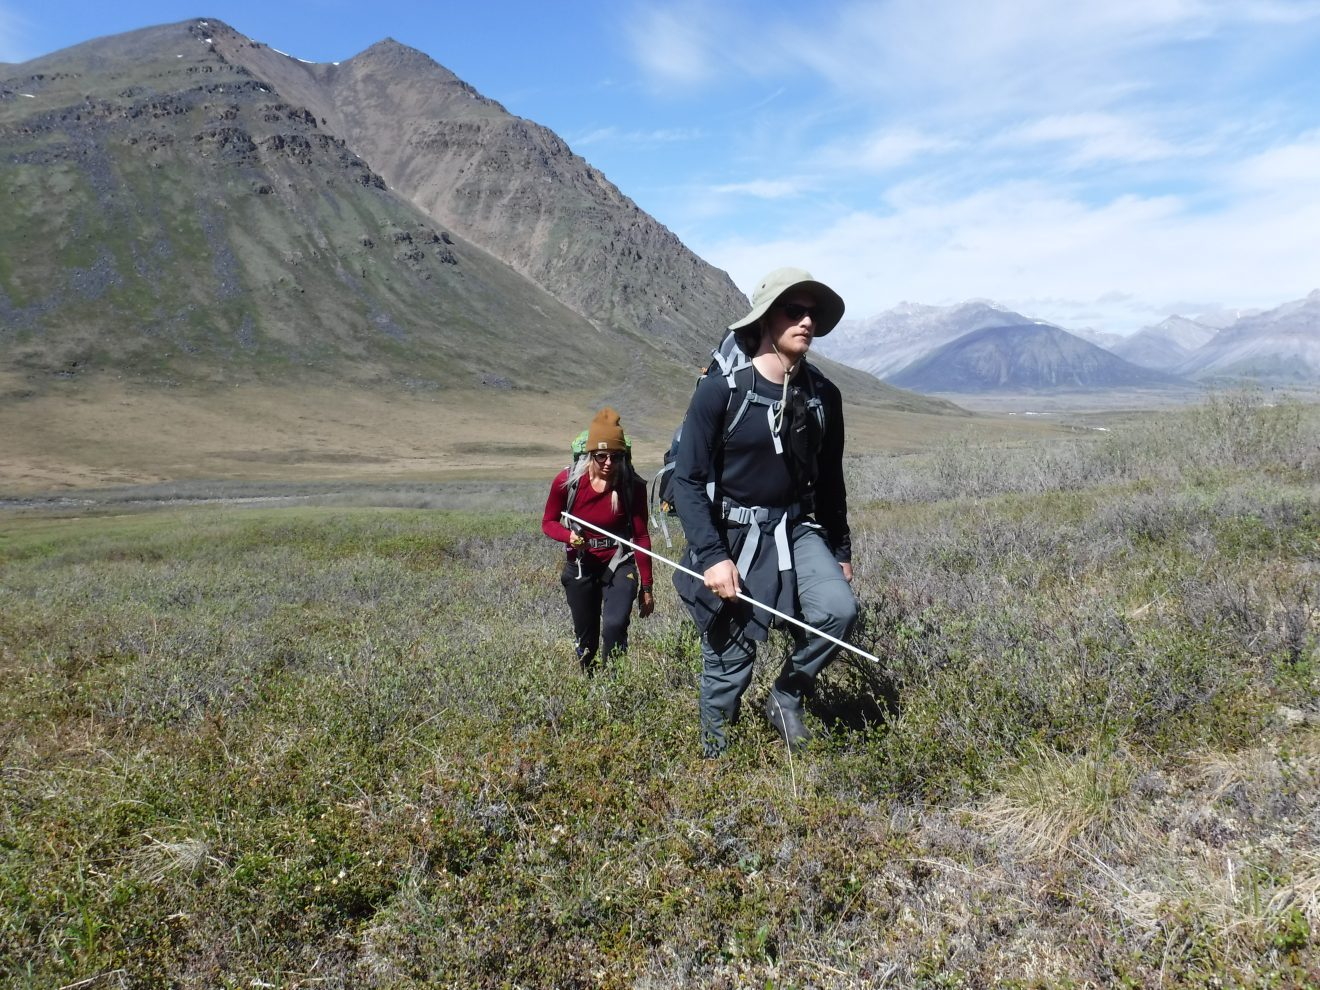 Students conduct research in the Gates of the Arctic National Park.